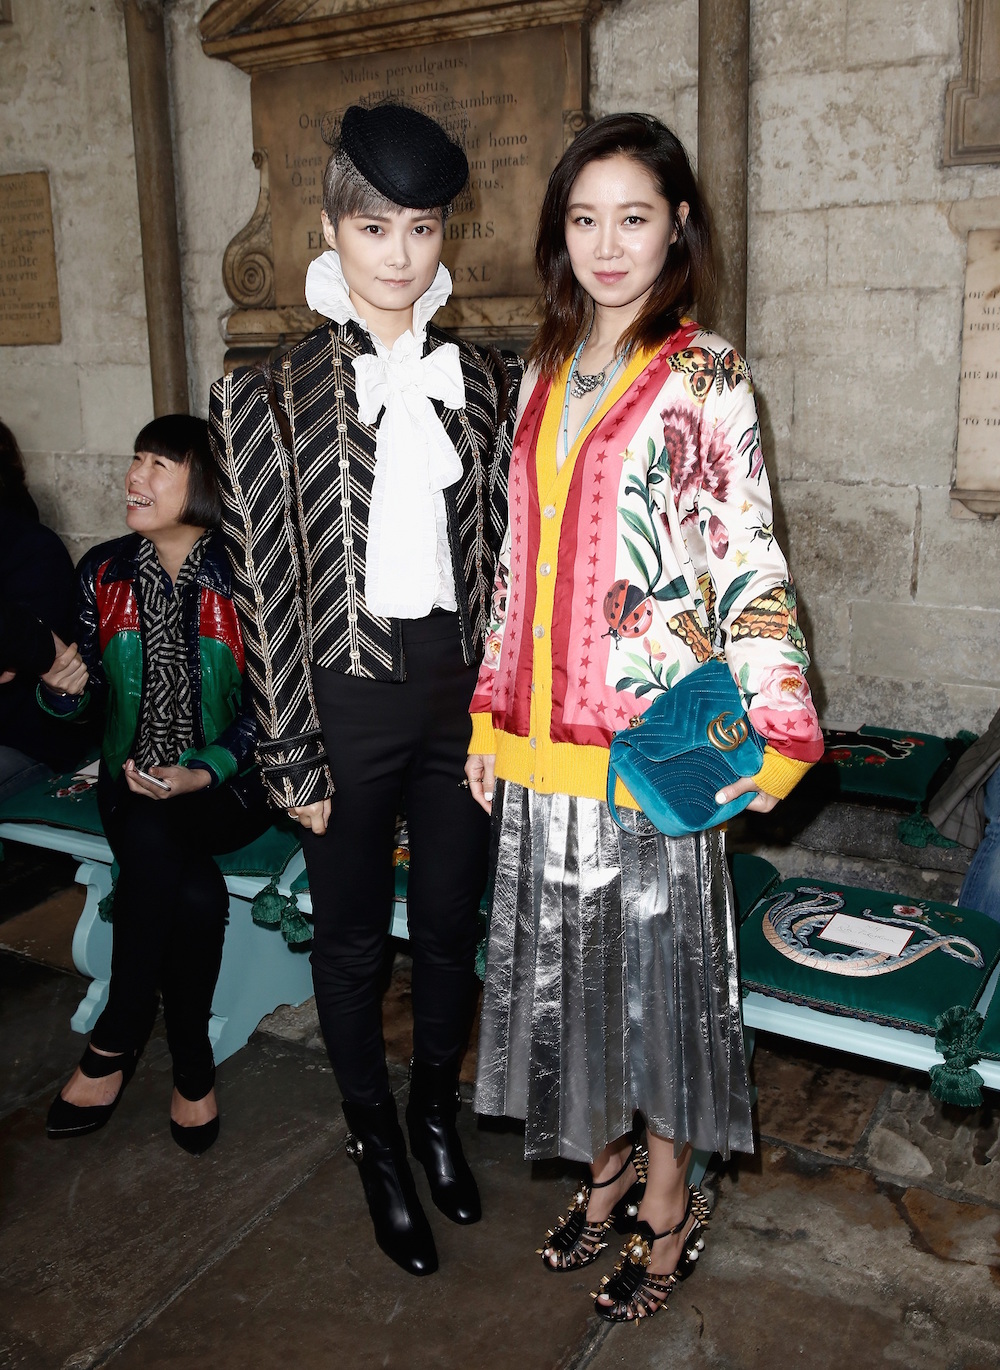 LONDON, ENGLAND - JUNE 02: Chris Lee (L) and Kong Hyo Jin attend the Gucci Cruise 2017 fashion show at the Cloisters of Westminster Abbey on June 2, 2016 in London, England. (Photo by John Phillips/Getty Images for GUCCI)